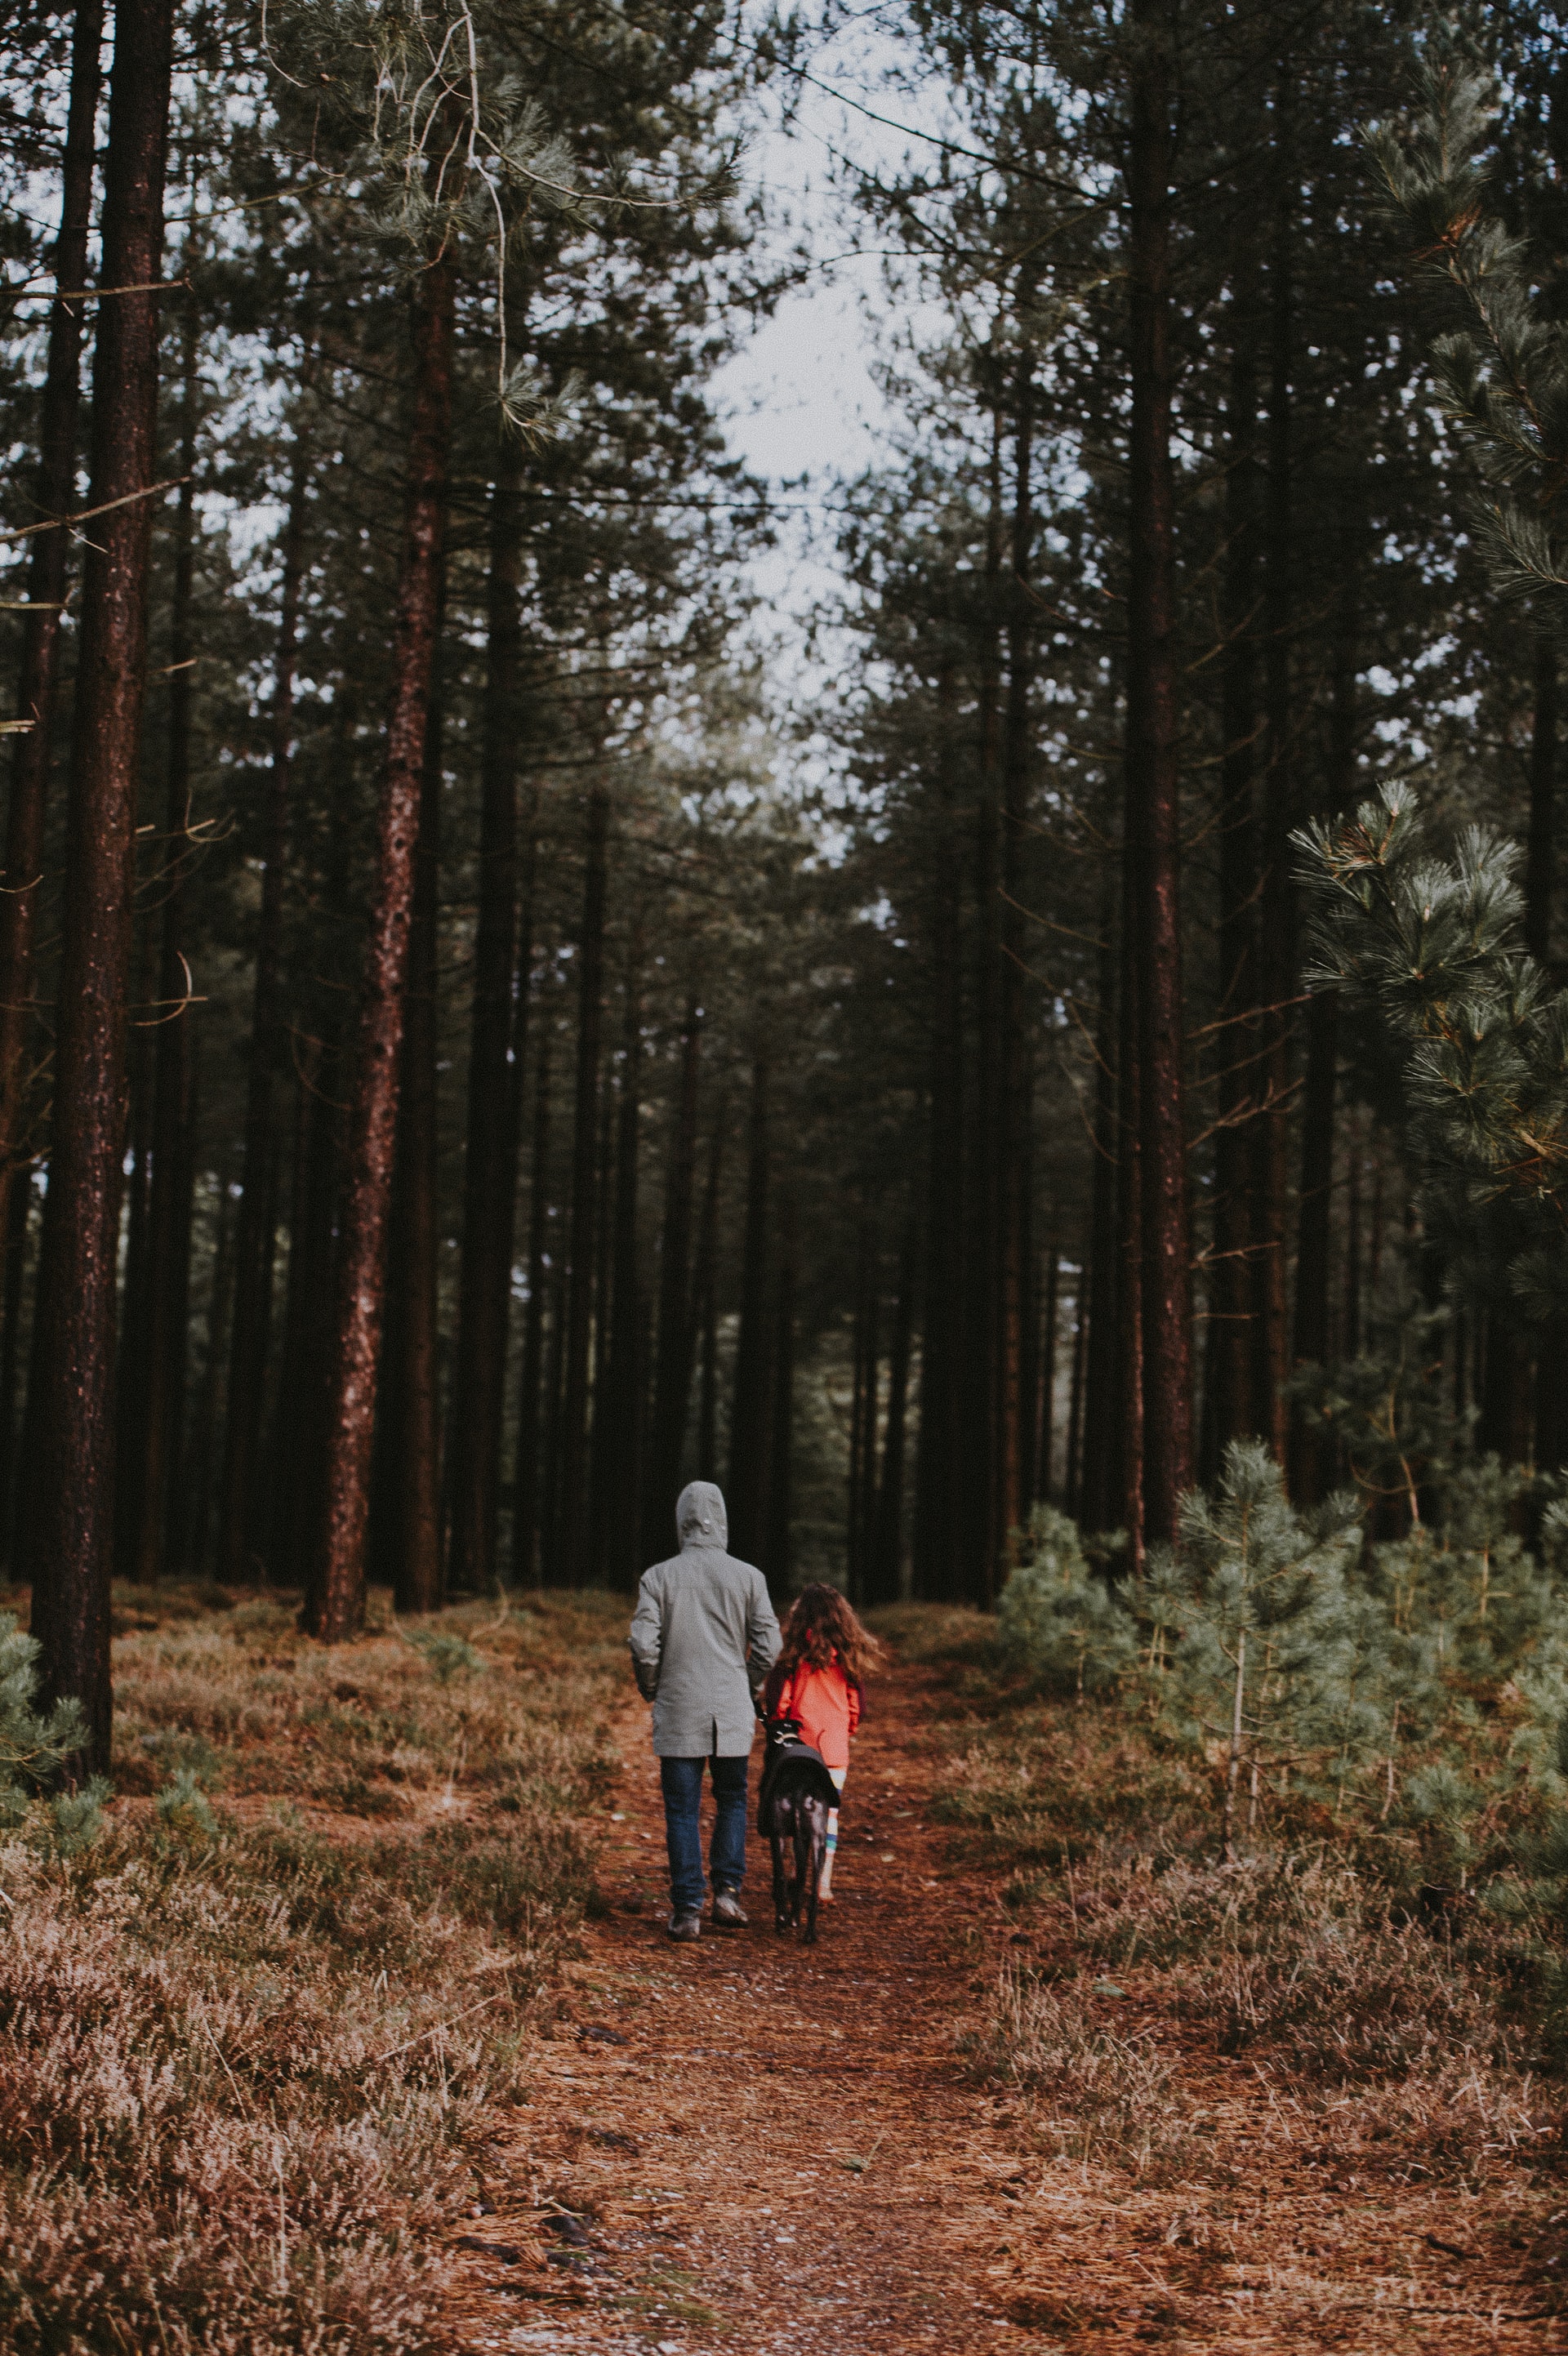 An adult in a gray jacket and young child in a red coat are walking together along a dirt path, through a forest with tall evergreens.